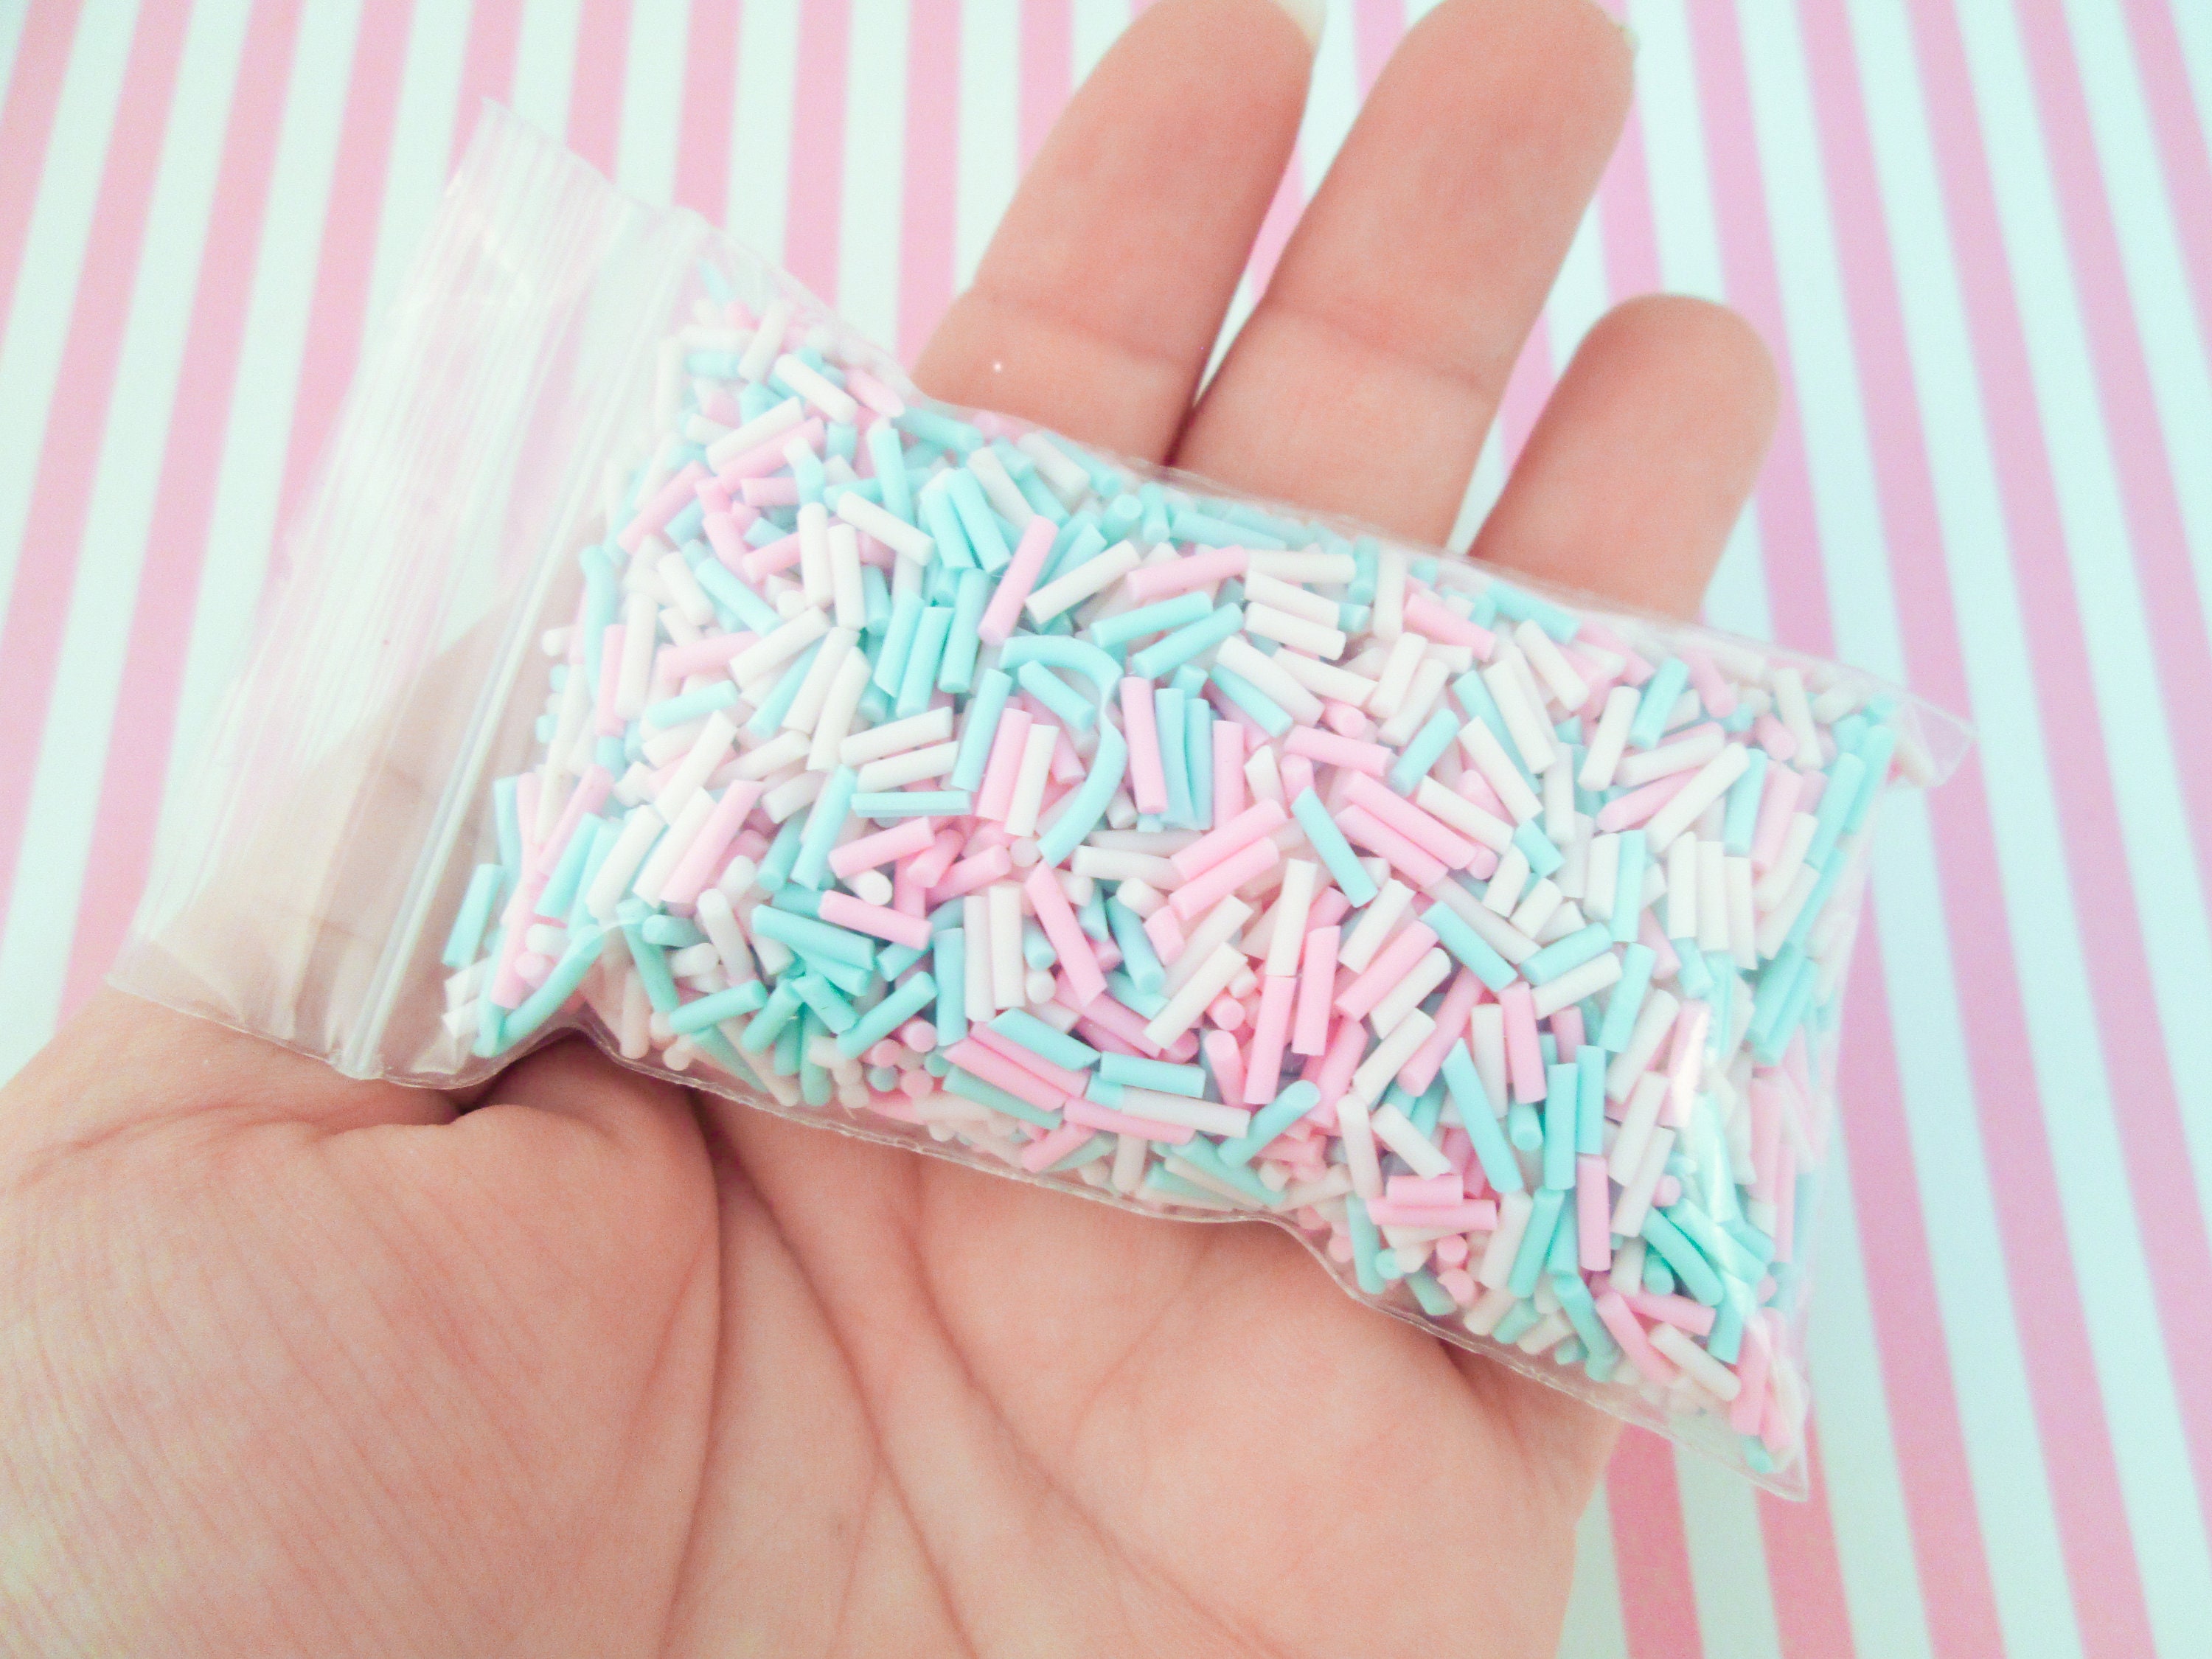 Pink Smiley Polymer Clay Flower Sprinkles, Fimo Fake Sprinkle Mix, Resin  Embellishment, Decoden Funfetti Jimmies, Easter Sprinkles, P108 